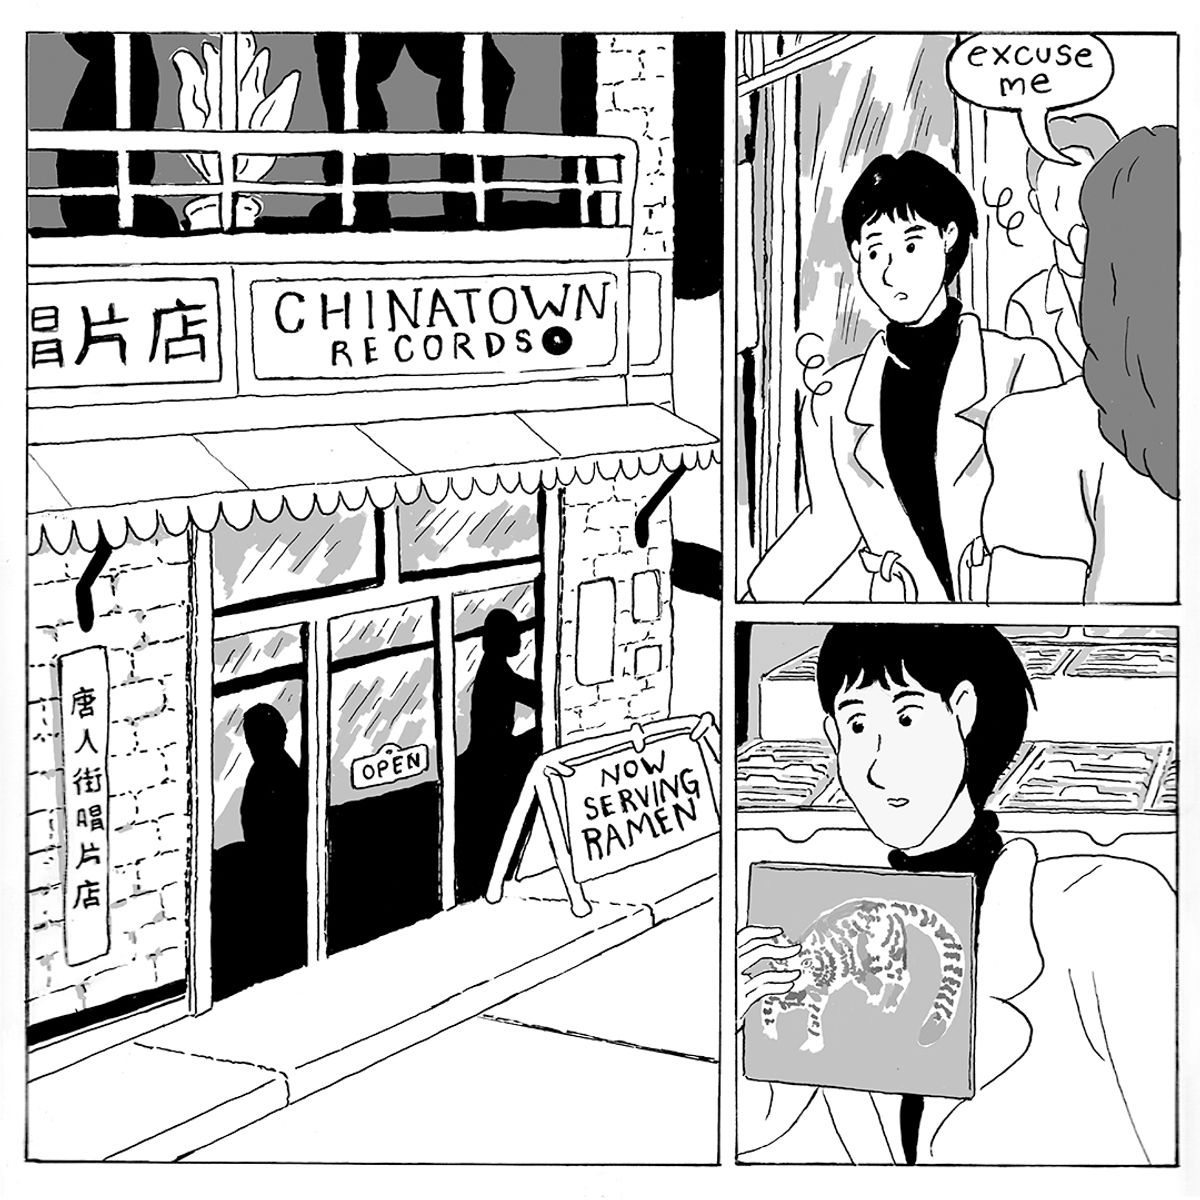 Page 1- Charlie enters a record store and browses records.